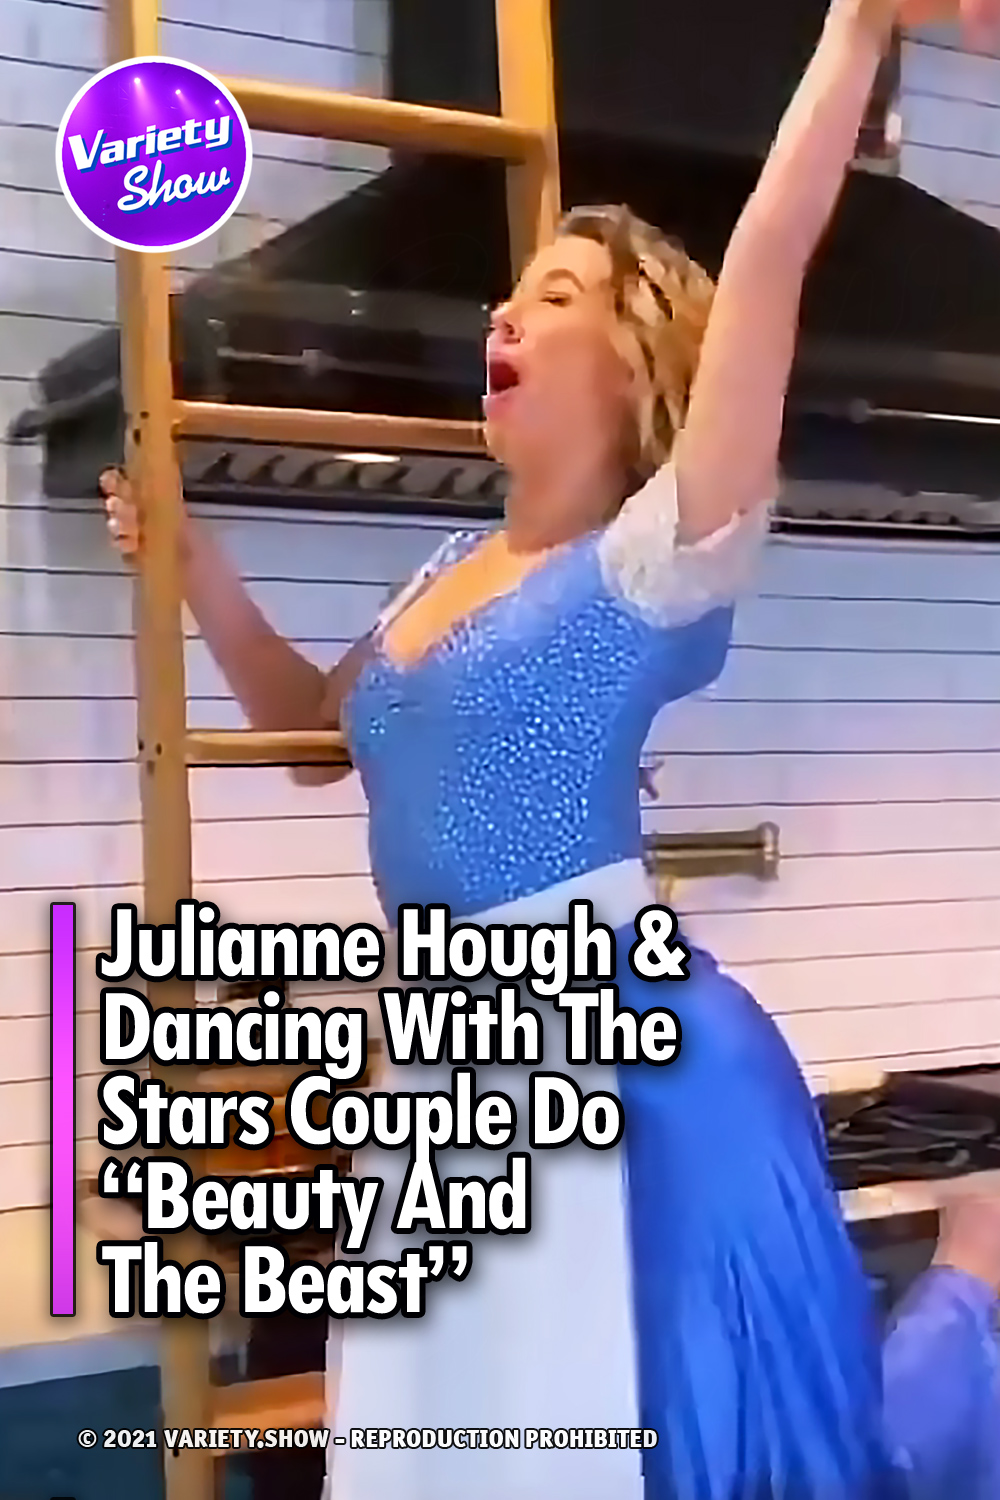 Julianne Hough & Dancing With The Stars Couple Do “Beauty And The Beast”